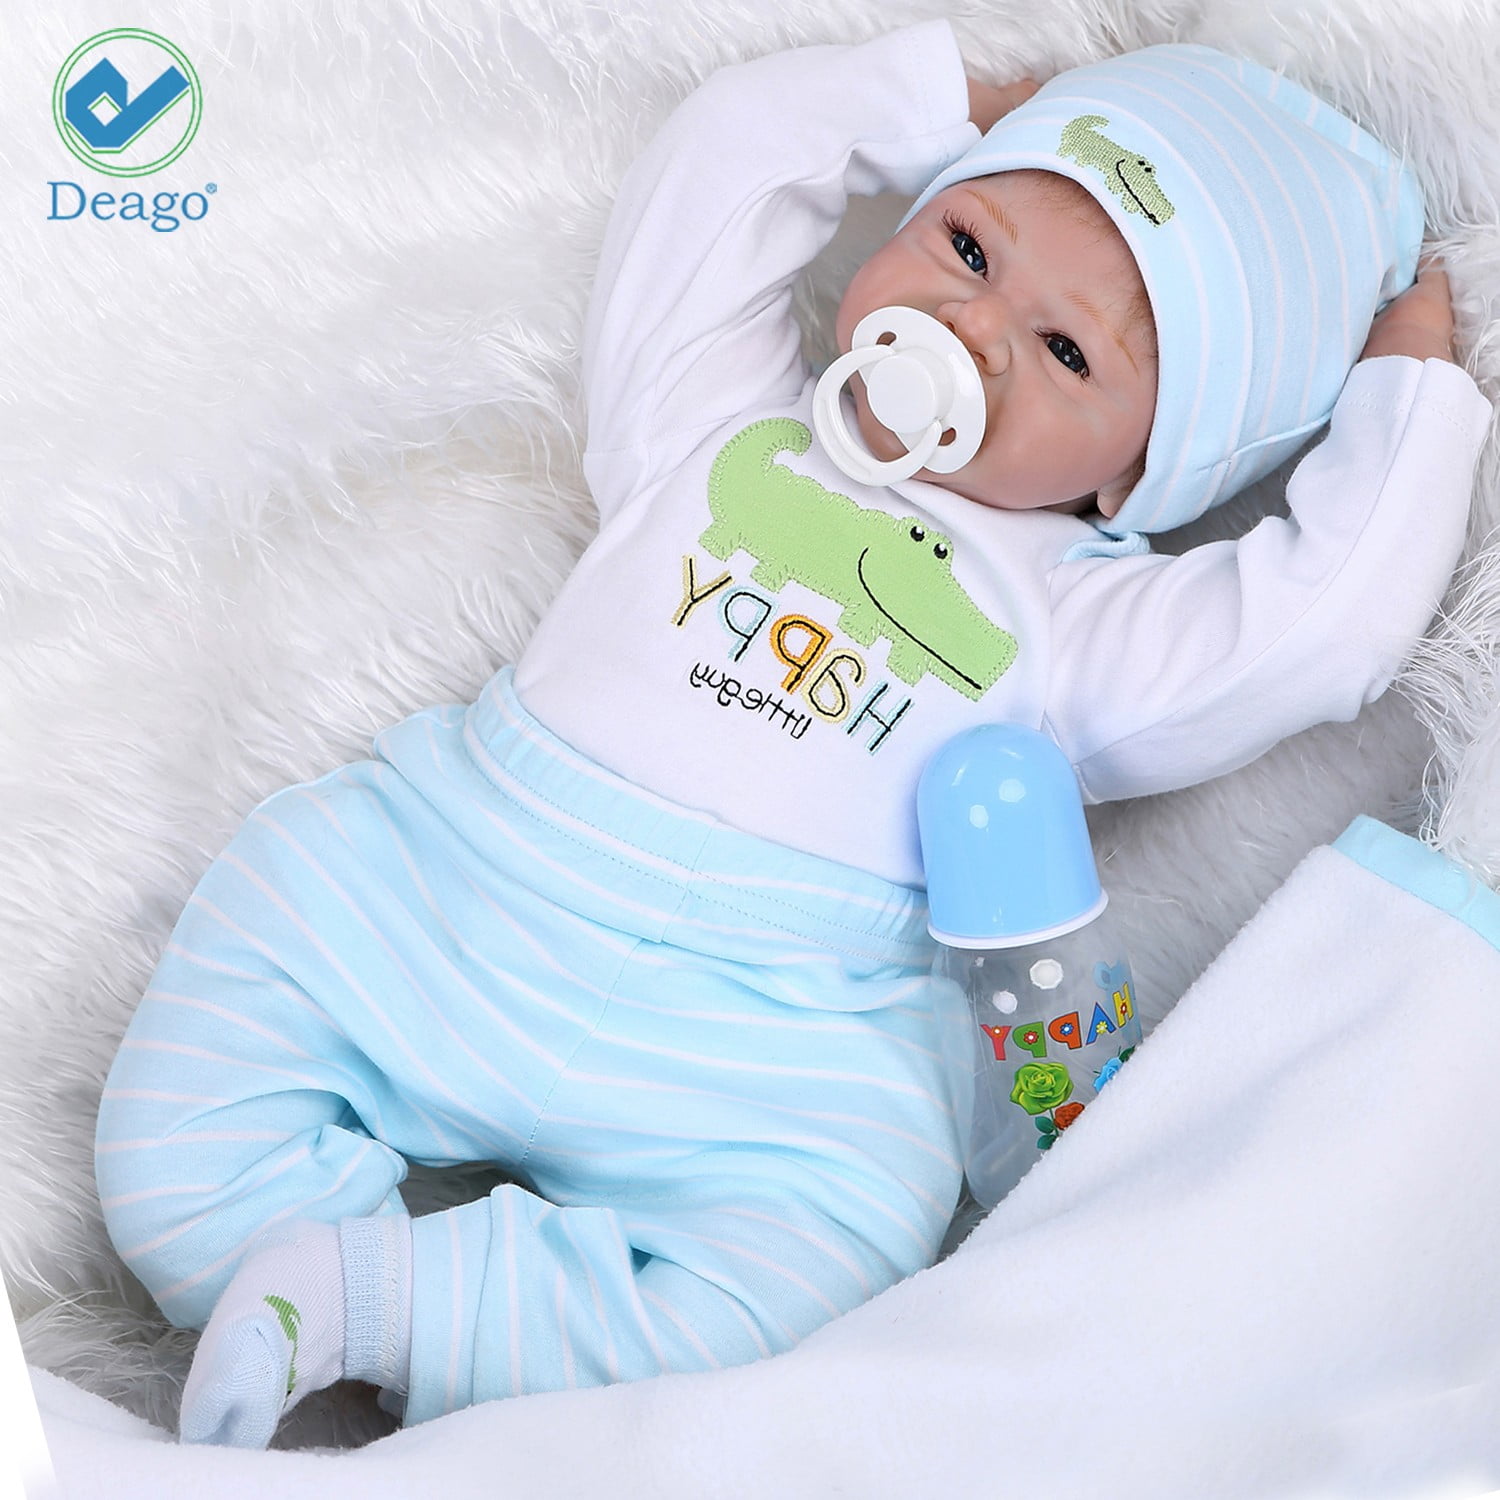 Baby Doll That Look Real Lifelike 15" Boy Weighted Doll Realistic Vinyl Body Toy 